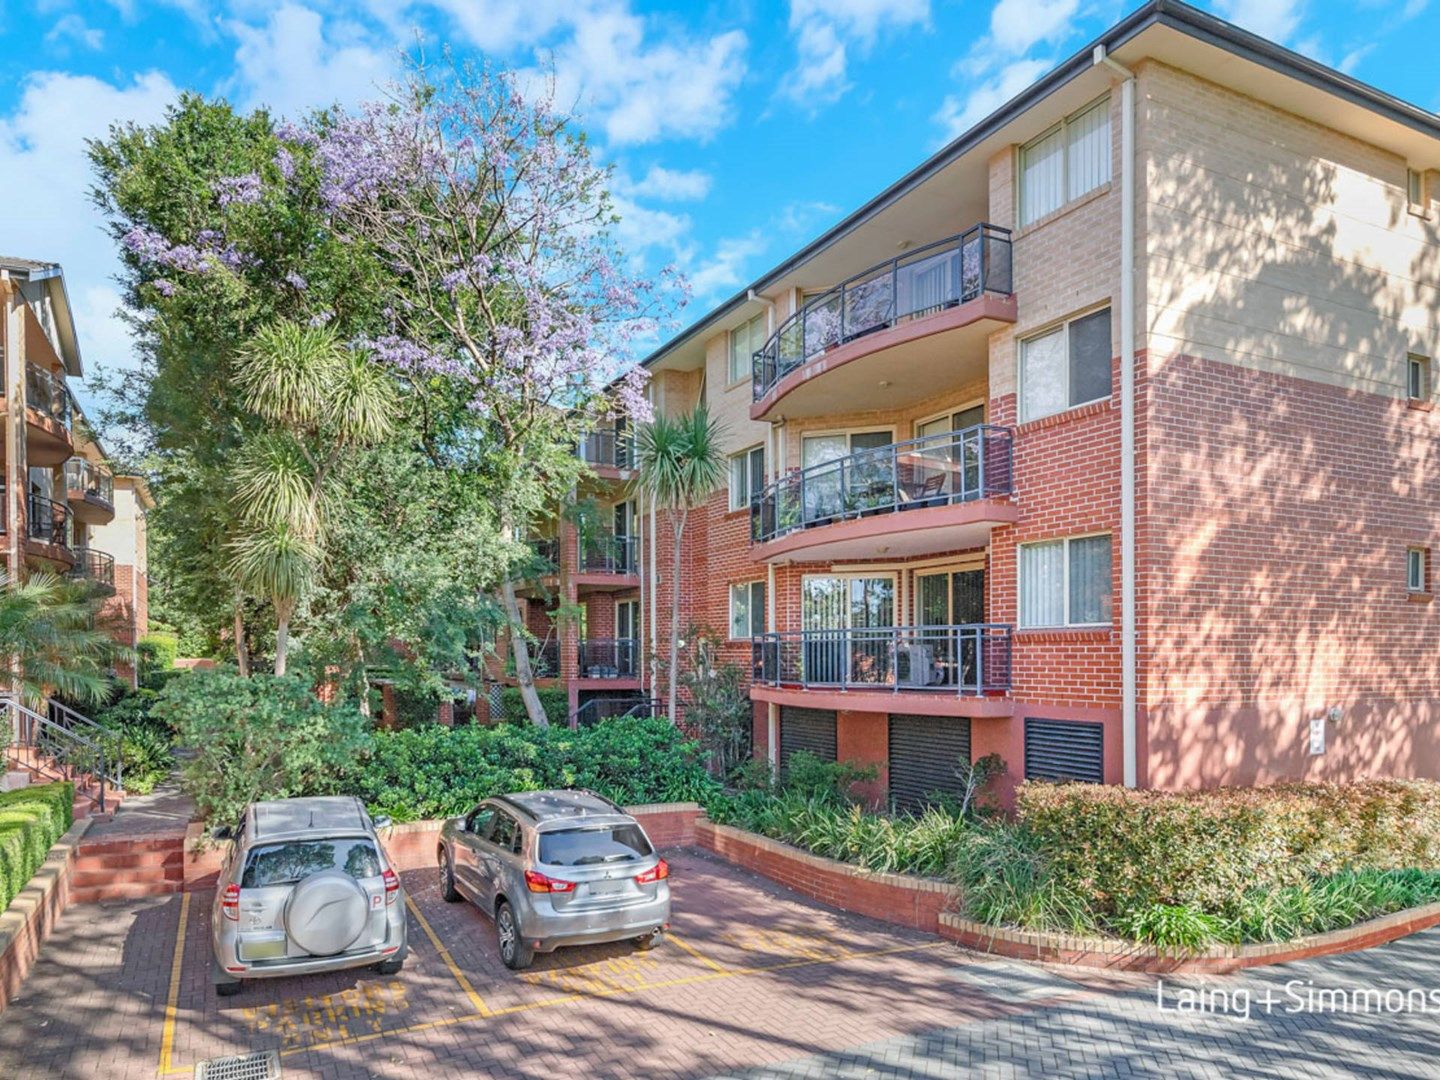 37/298-312 Pennant Hills Road, Pennant Hills NSW 2120